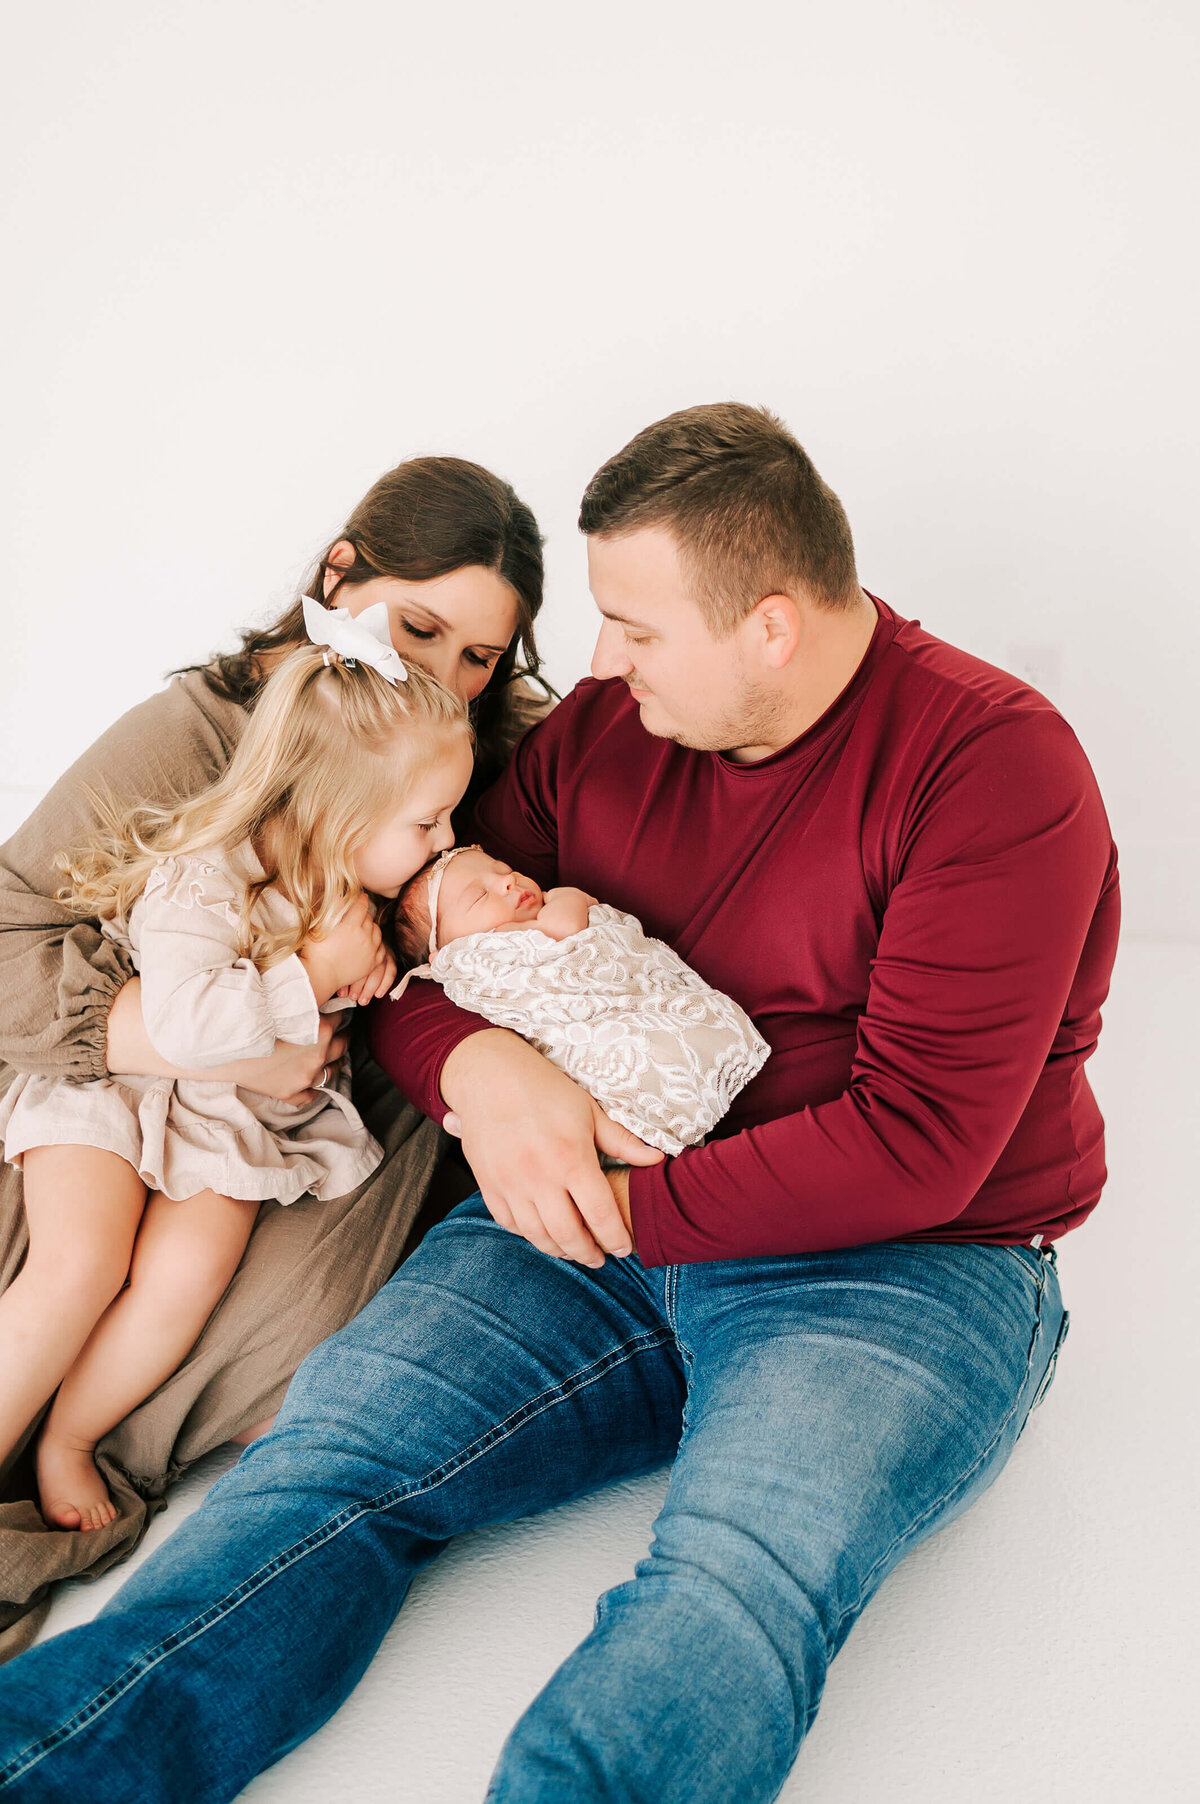 Springfield MO newborn photographer Jessica Kennedy of The XO Photography captures toddler kissing her newborn sister on parents laps